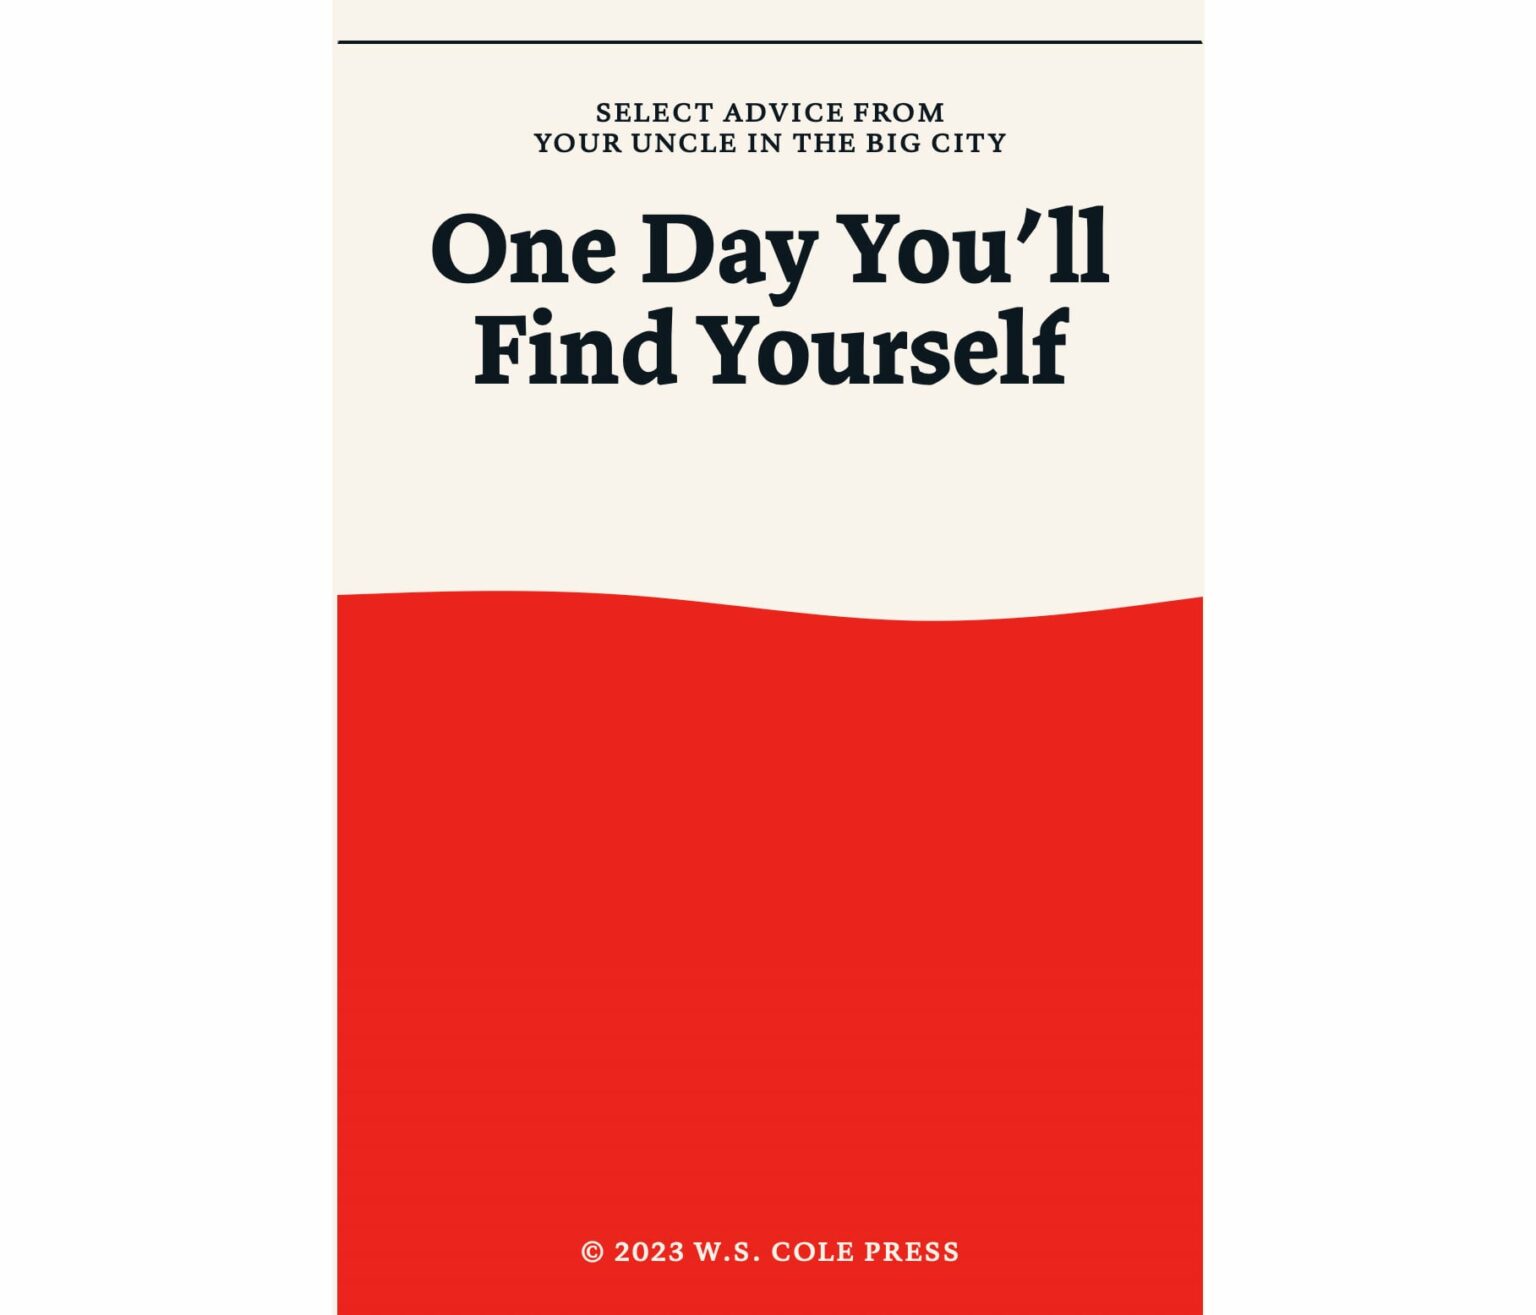 One Day You'll Find Yourself